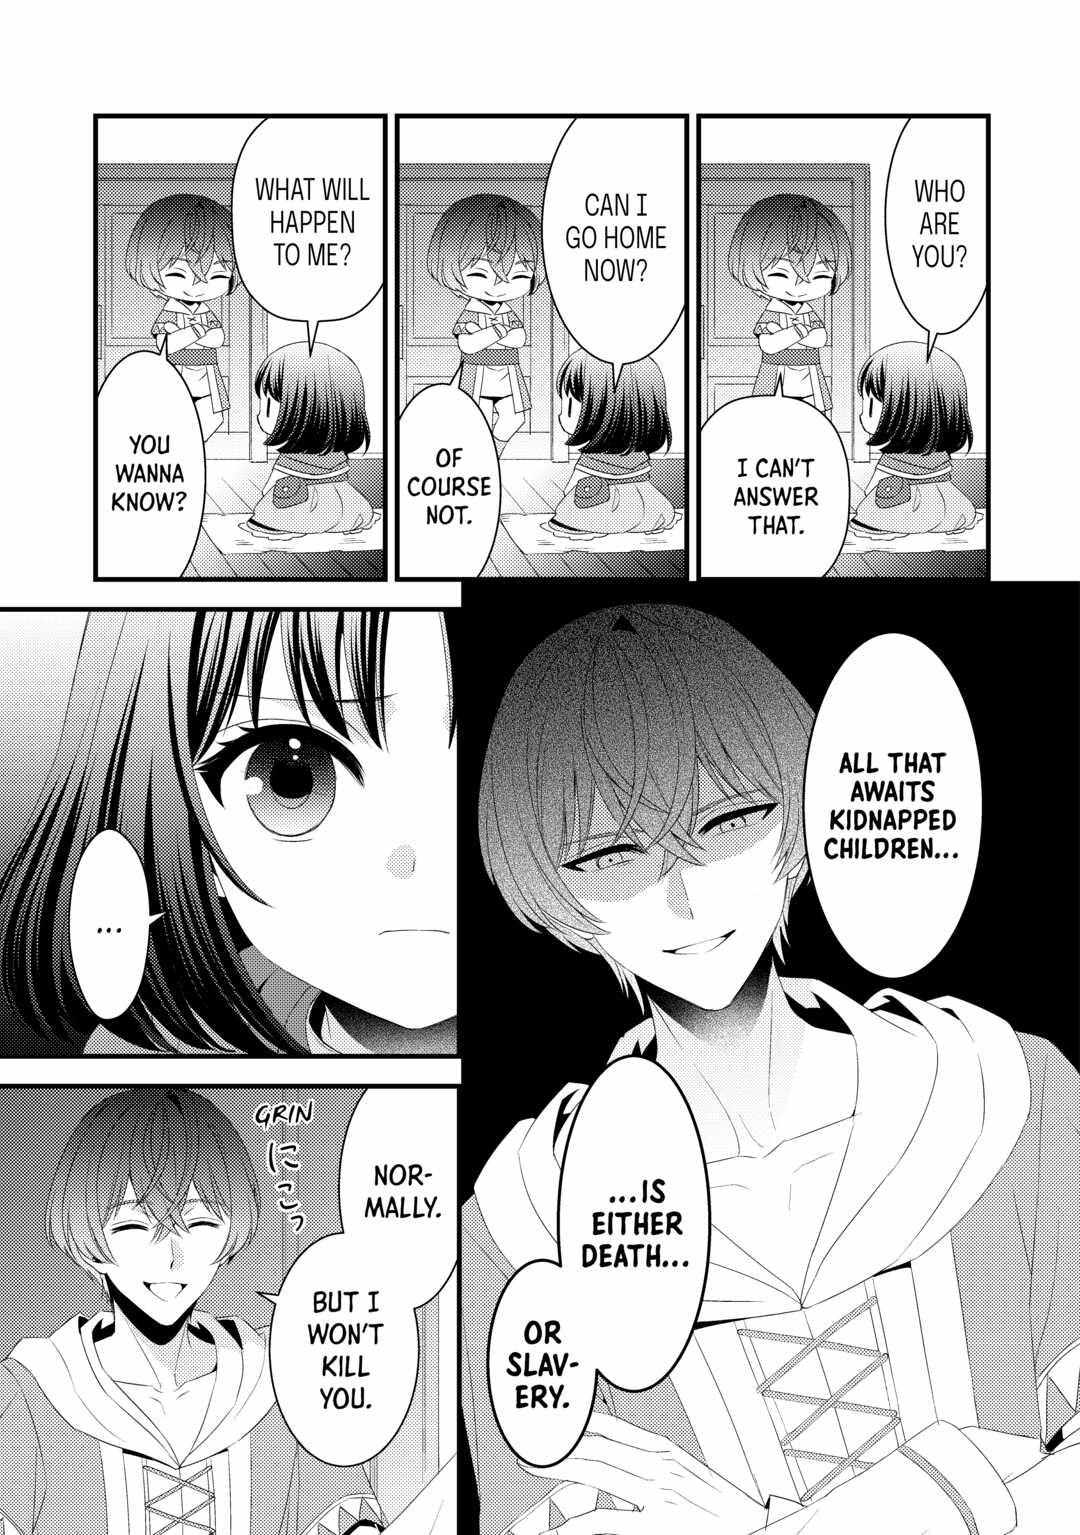 Leave Me Alone – I Want to Enjoy Cheat Life with My Familiar - chapter 17 - #4